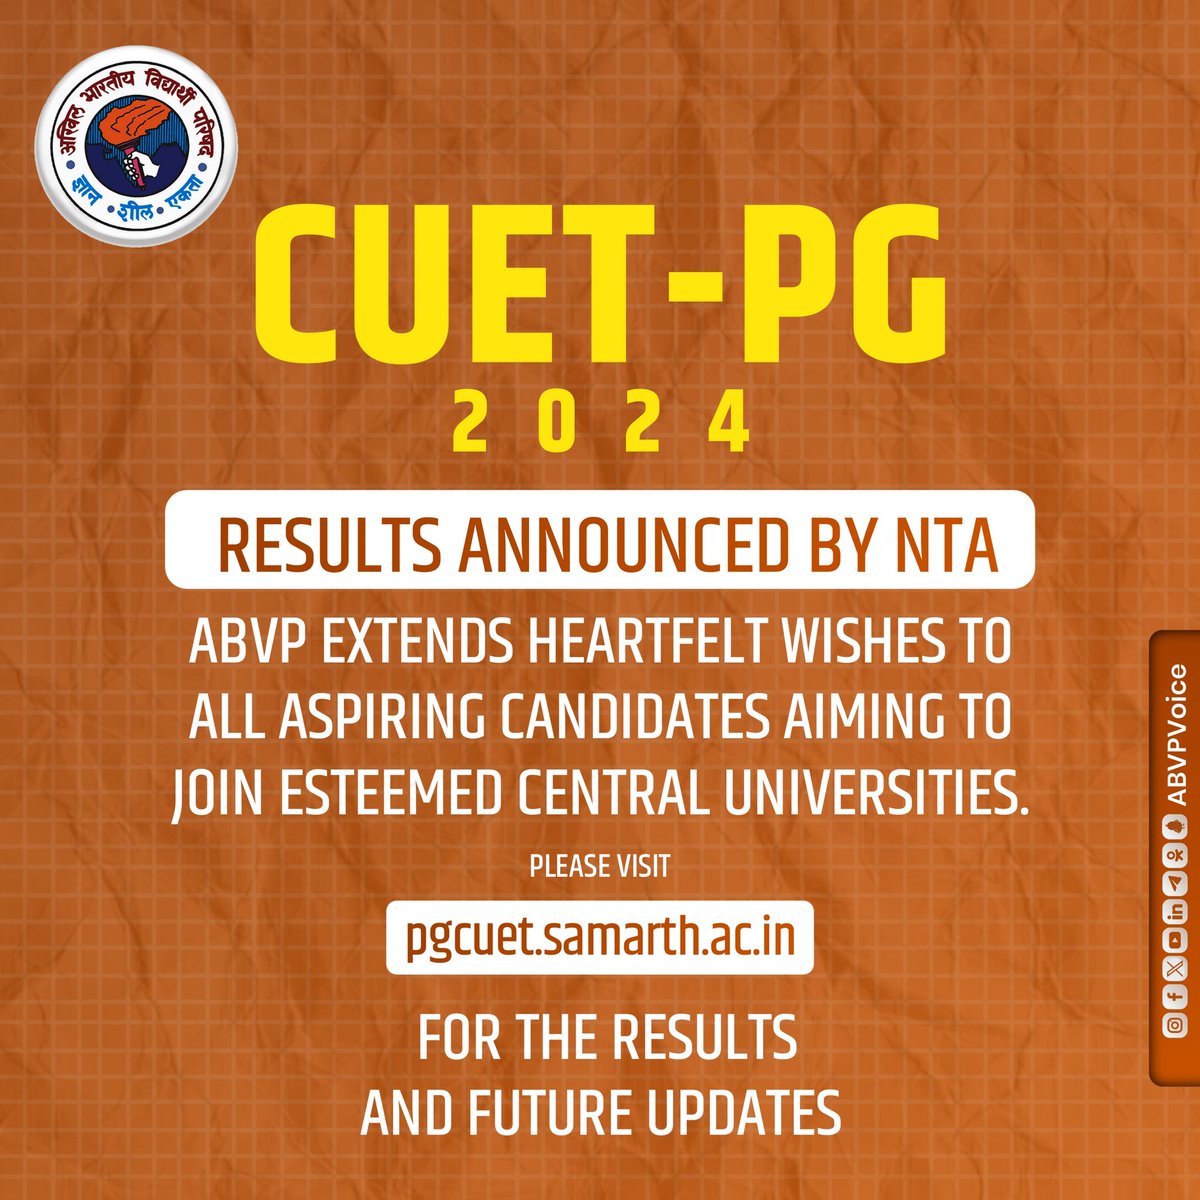 CUET-PG 2024 results announced by NTA. ABVP extends heartfelt wishes to all aspiring candidates aiming to join esteemed Central Universities. Please visit pgcuet.samarth.ac.in for the results and future updates.